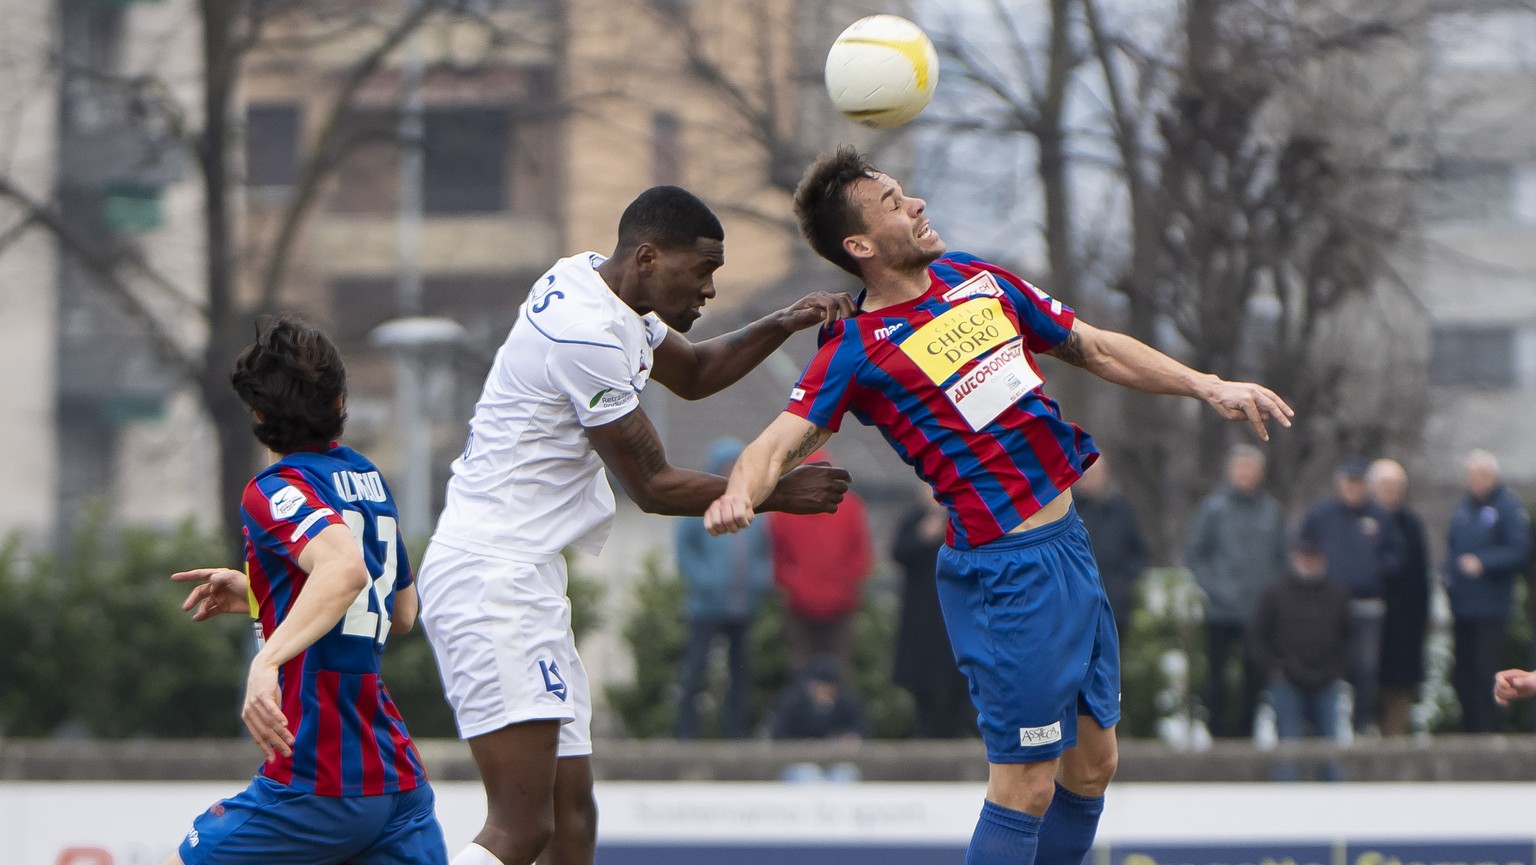 From center left, Lausanne&#039;s player Elton Monteiro and Chiasso&#039;s Player Patrick Rossini, during the Challenge League soccer match FC Chiasso against Lausanne Sport, at the Riva IV stadium in ...